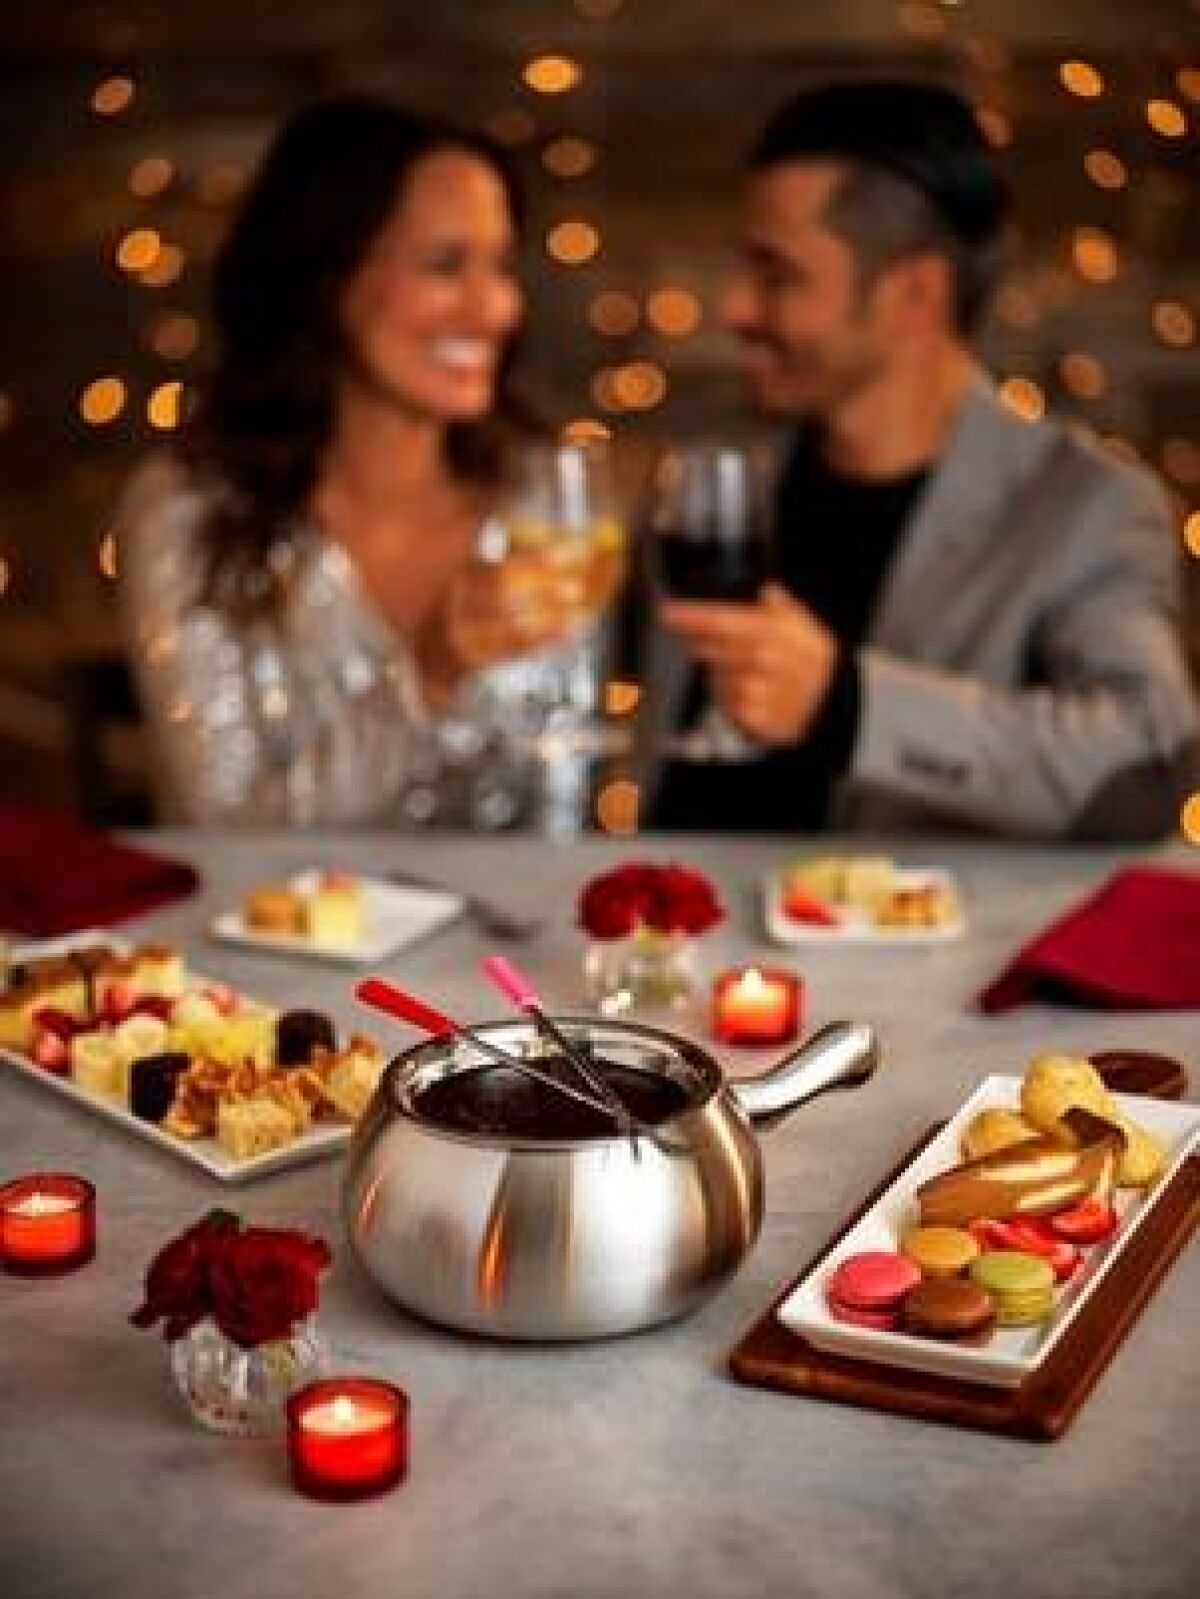 The Melting Pot in downtown San Diego is hosting a Valentine's dinner on Feb. 12 and 14.